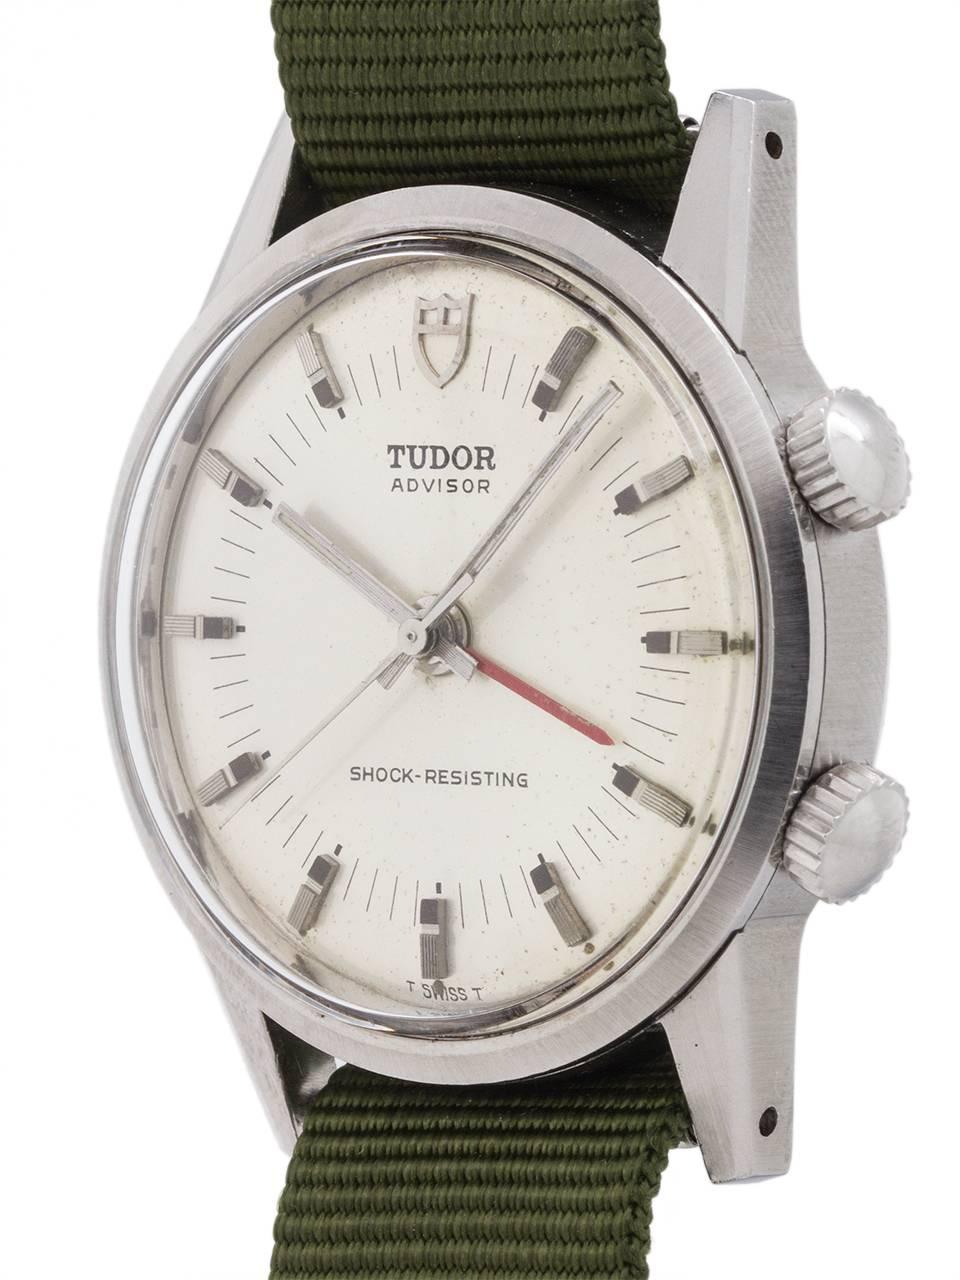 
Man’s vintage Tudor Advisor alarm model ref #10050 circa 1982. Featuriing a 34 x 41mm stainless steel screw back case with silver satin original dial signed Tudor Advisor Shock Resisting T SWISS T, with with applied silvered indexes with patina’d